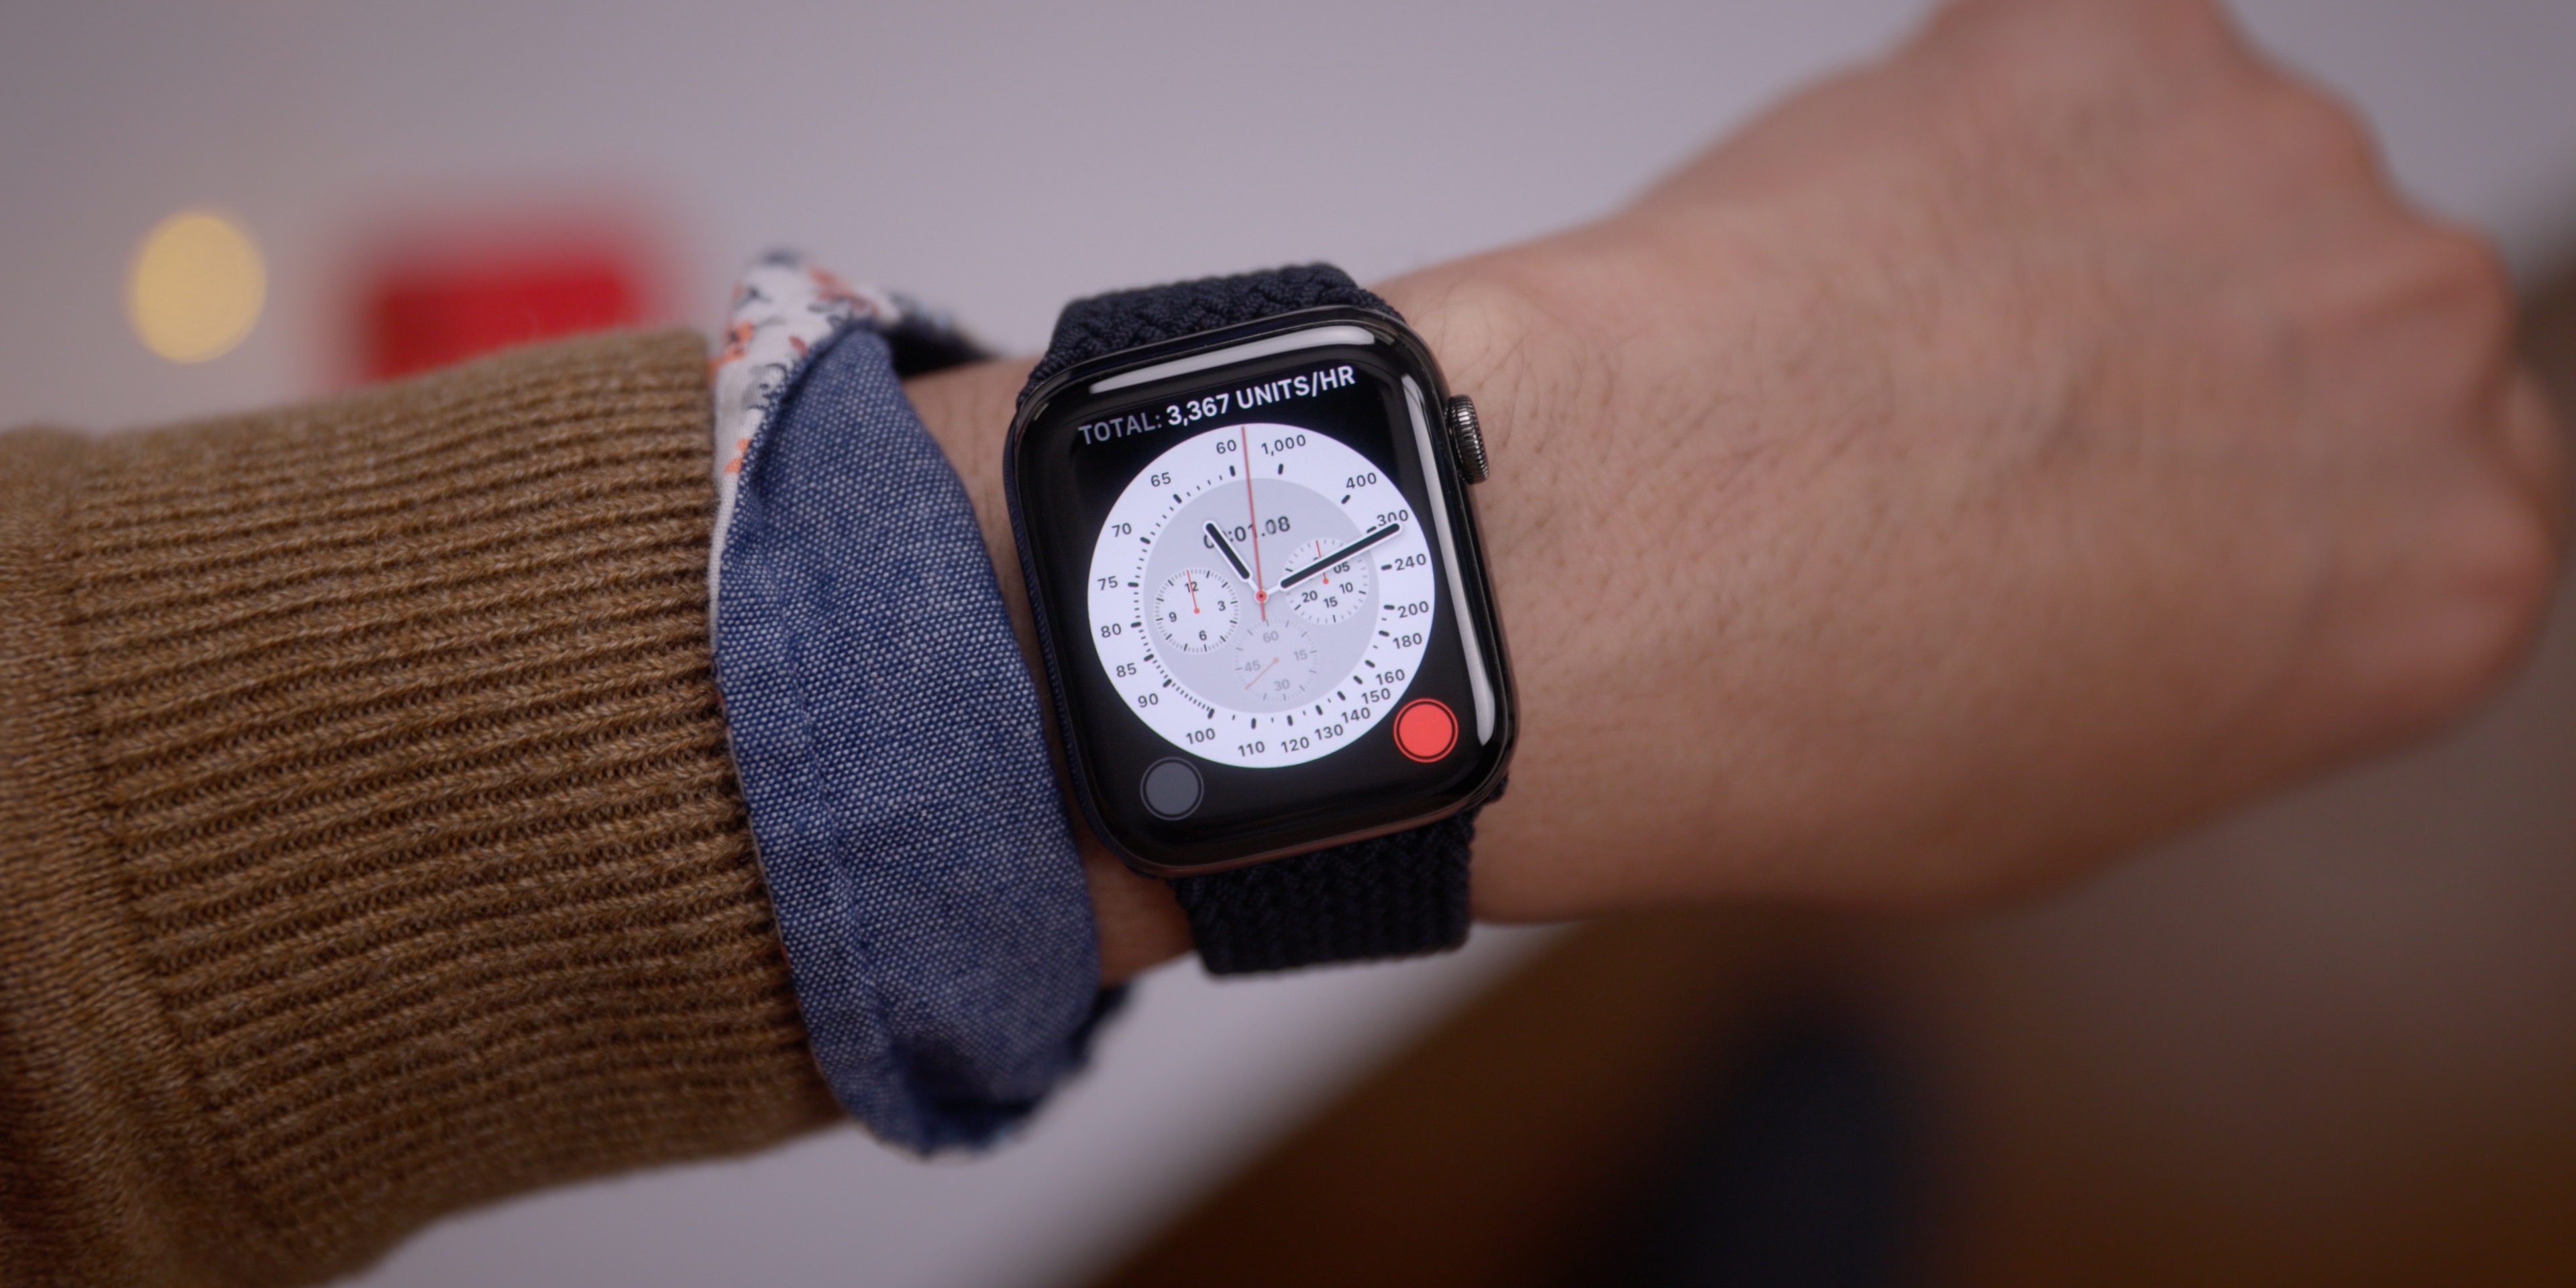 watchOS-7-recap-review-Chronograph-Pro-Watch-Face.jpg?quality=82&strip=all